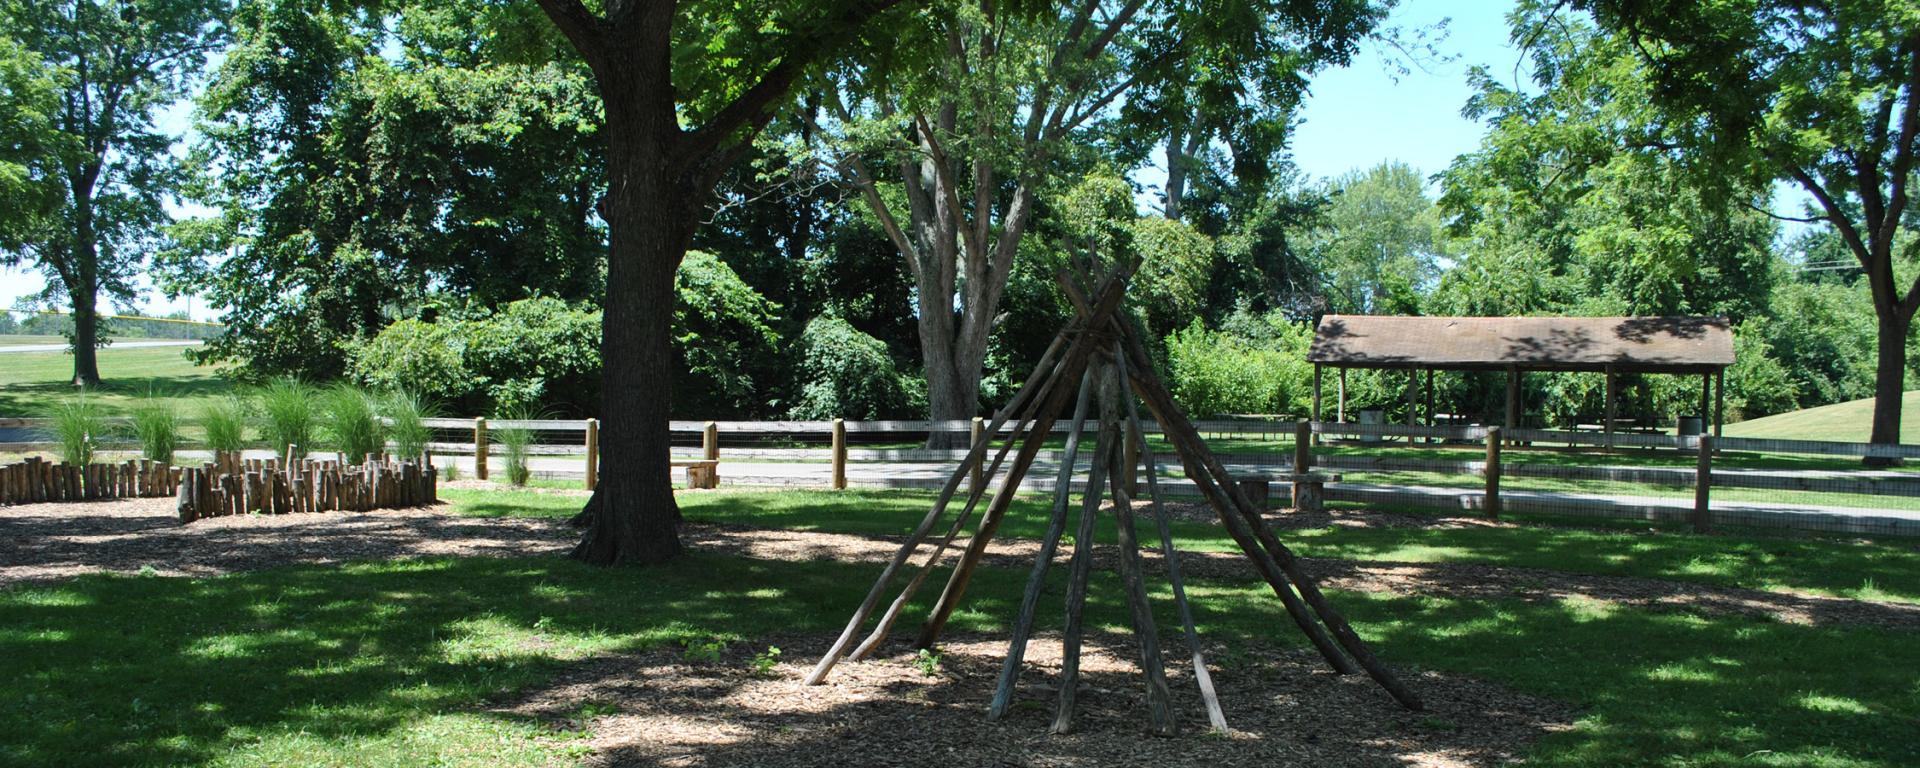 climbing structure at park